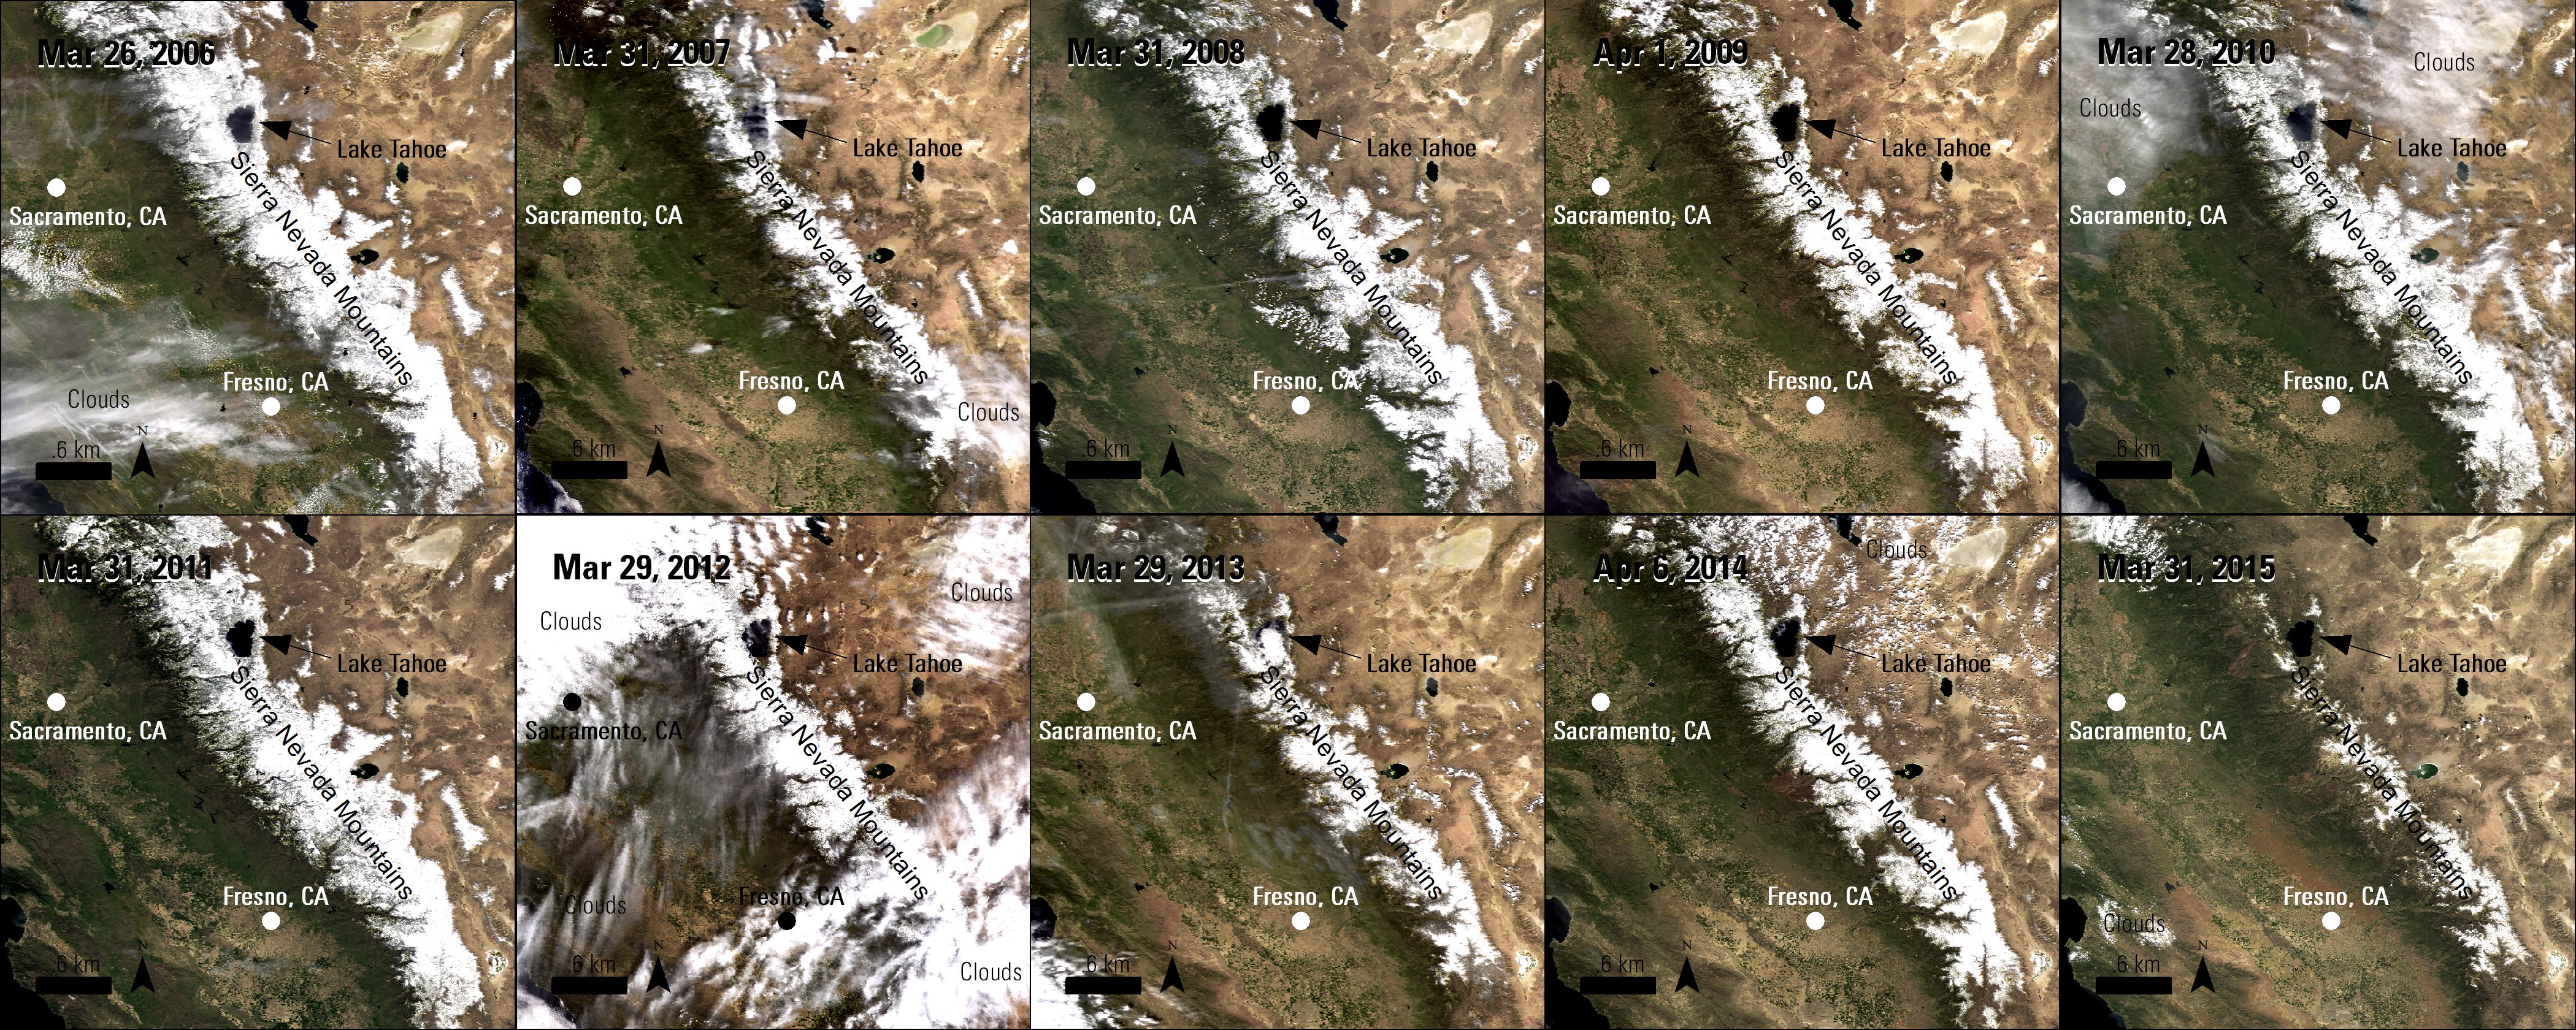 Ten Terra MODIS Surface Reflectance images over the Sierra Nevada Mountains, California, United States showing changes in snow pack cover throughout 2006 to 2015.